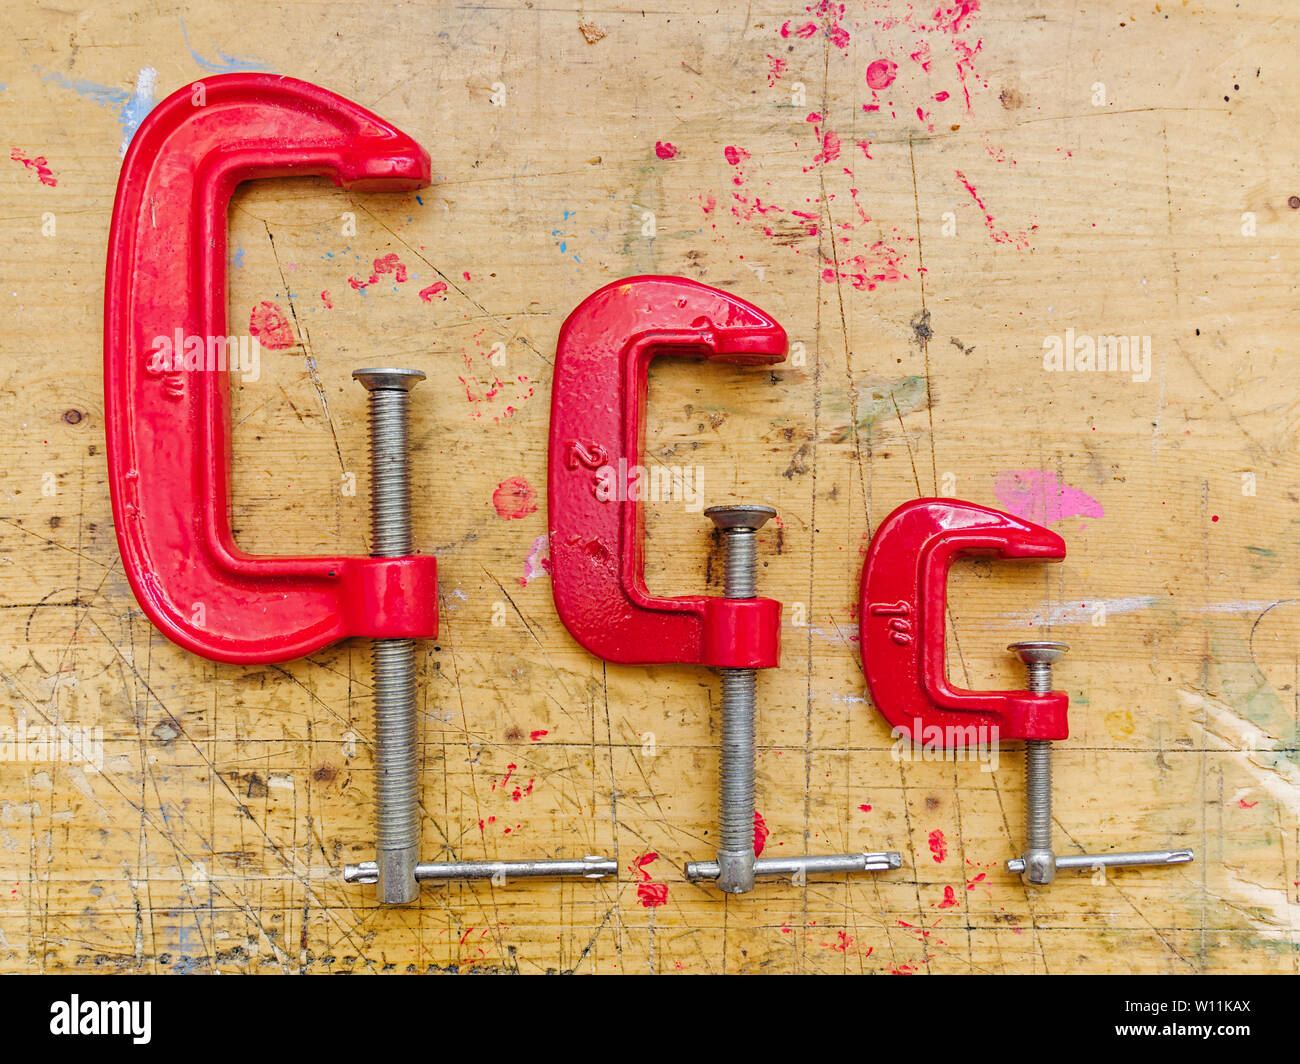 Set of three red  metal C clamps on wooden workbench surface background. Stock Photo